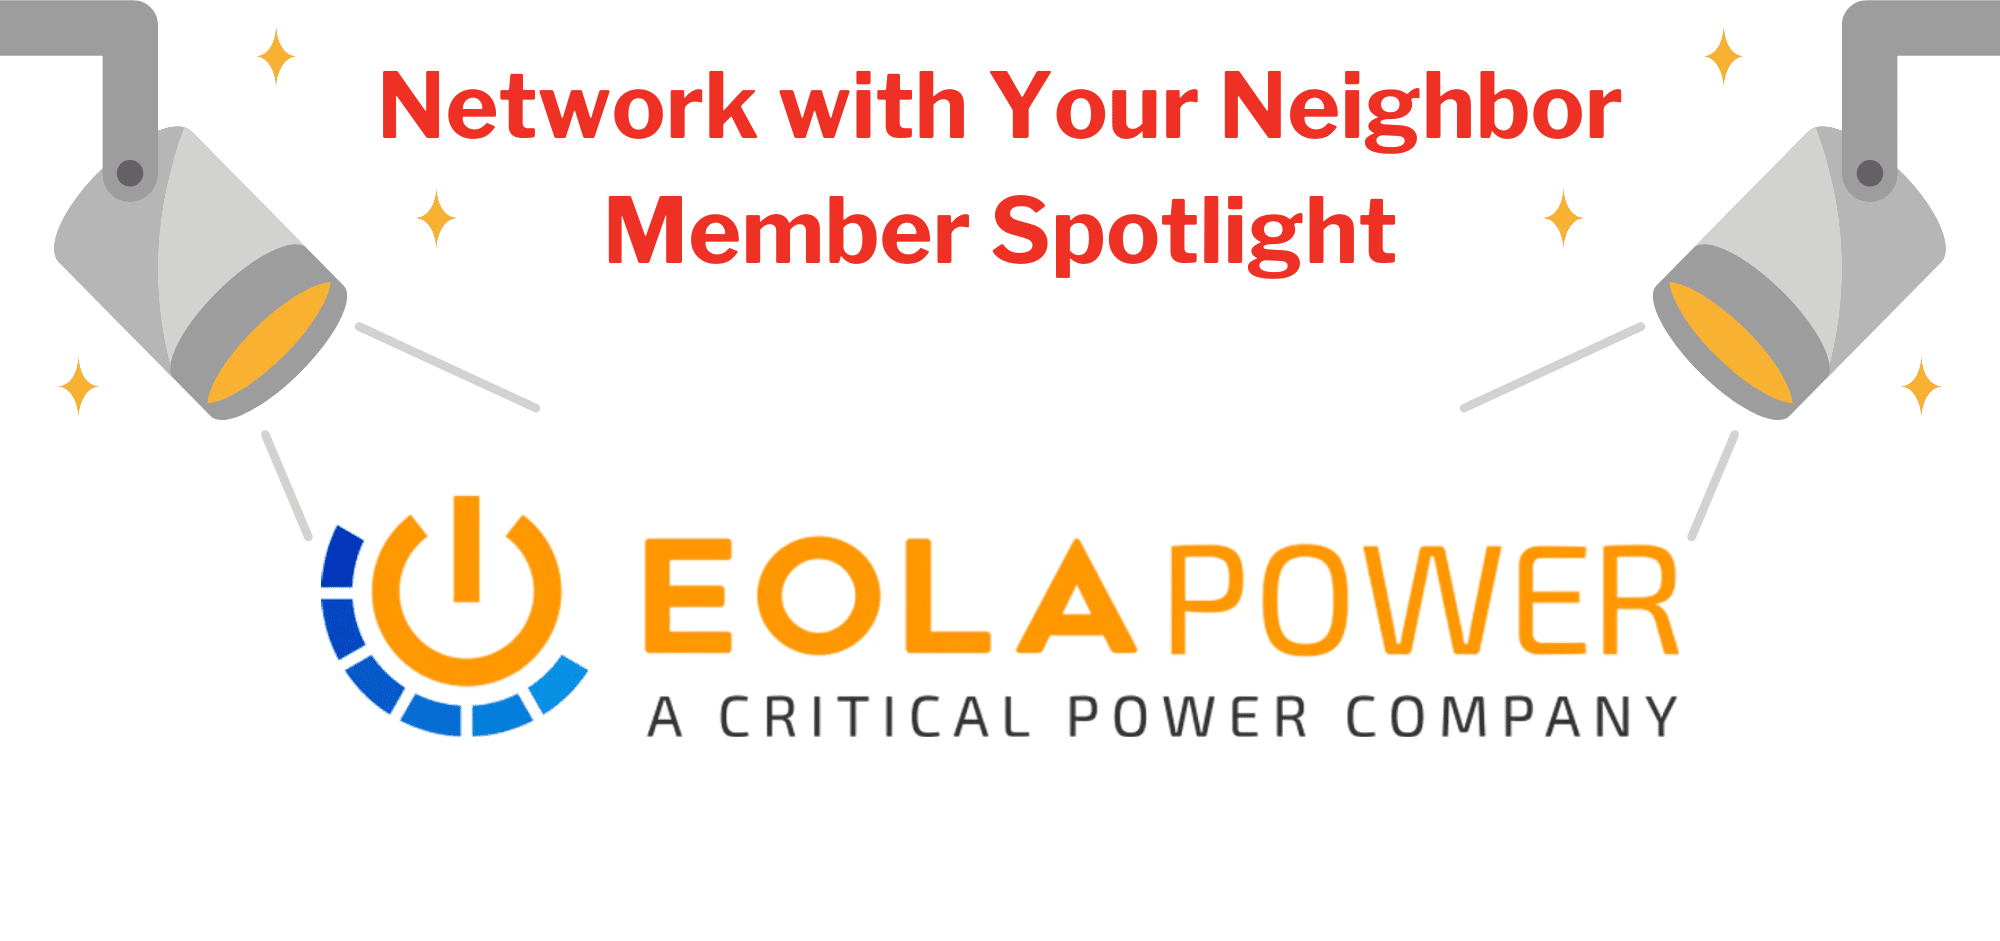 Networking with Your Neighbor